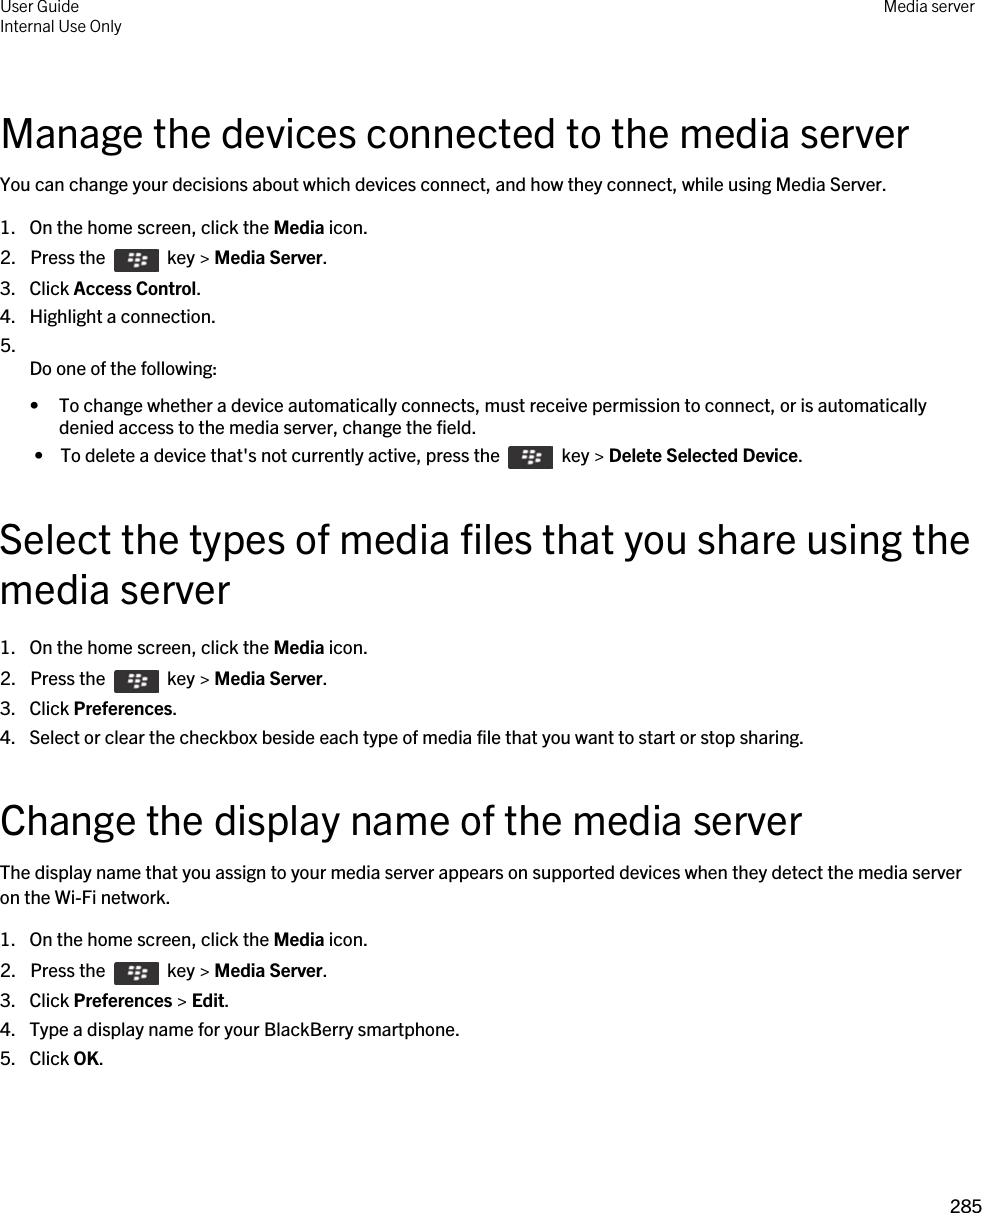 Manage the devices connected to the media serverYou can change your decisions about which devices connect, and how they connect, while using Media Server.1. On the home screen, click the Media icon.2.  Press the    key &gt; Media Server.3. Click Access Control.4. Highlight a connection.5.  Do one of the following:• To change whether a device automatically connects, must receive permission to connect, or is automatically denied access to the media server, change the field. •  To delete a device that&apos;s not currently active, press the    key &gt; Delete Selected Device.Select the types of media files that you share using the media server1. On the home screen, click the Media icon.2.  Press the    key &gt; Media Server.3. Click Preferences.4. Select or clear the checkbox beside each type of media file that you want to start or stop sharing.Change the display name of the media serverThe display name that you assign to your media server appears on supported devices when they detect the media server on the Wi-Fi network.1. On the home screen, click the Media icon.2.  Press the    key &gt; Media Server.3. Click Preferences &gt; Edit.4. Type a display name for your BlackBerry smartphone.5. Click OK.User GuideInternal Use Only Media server285 